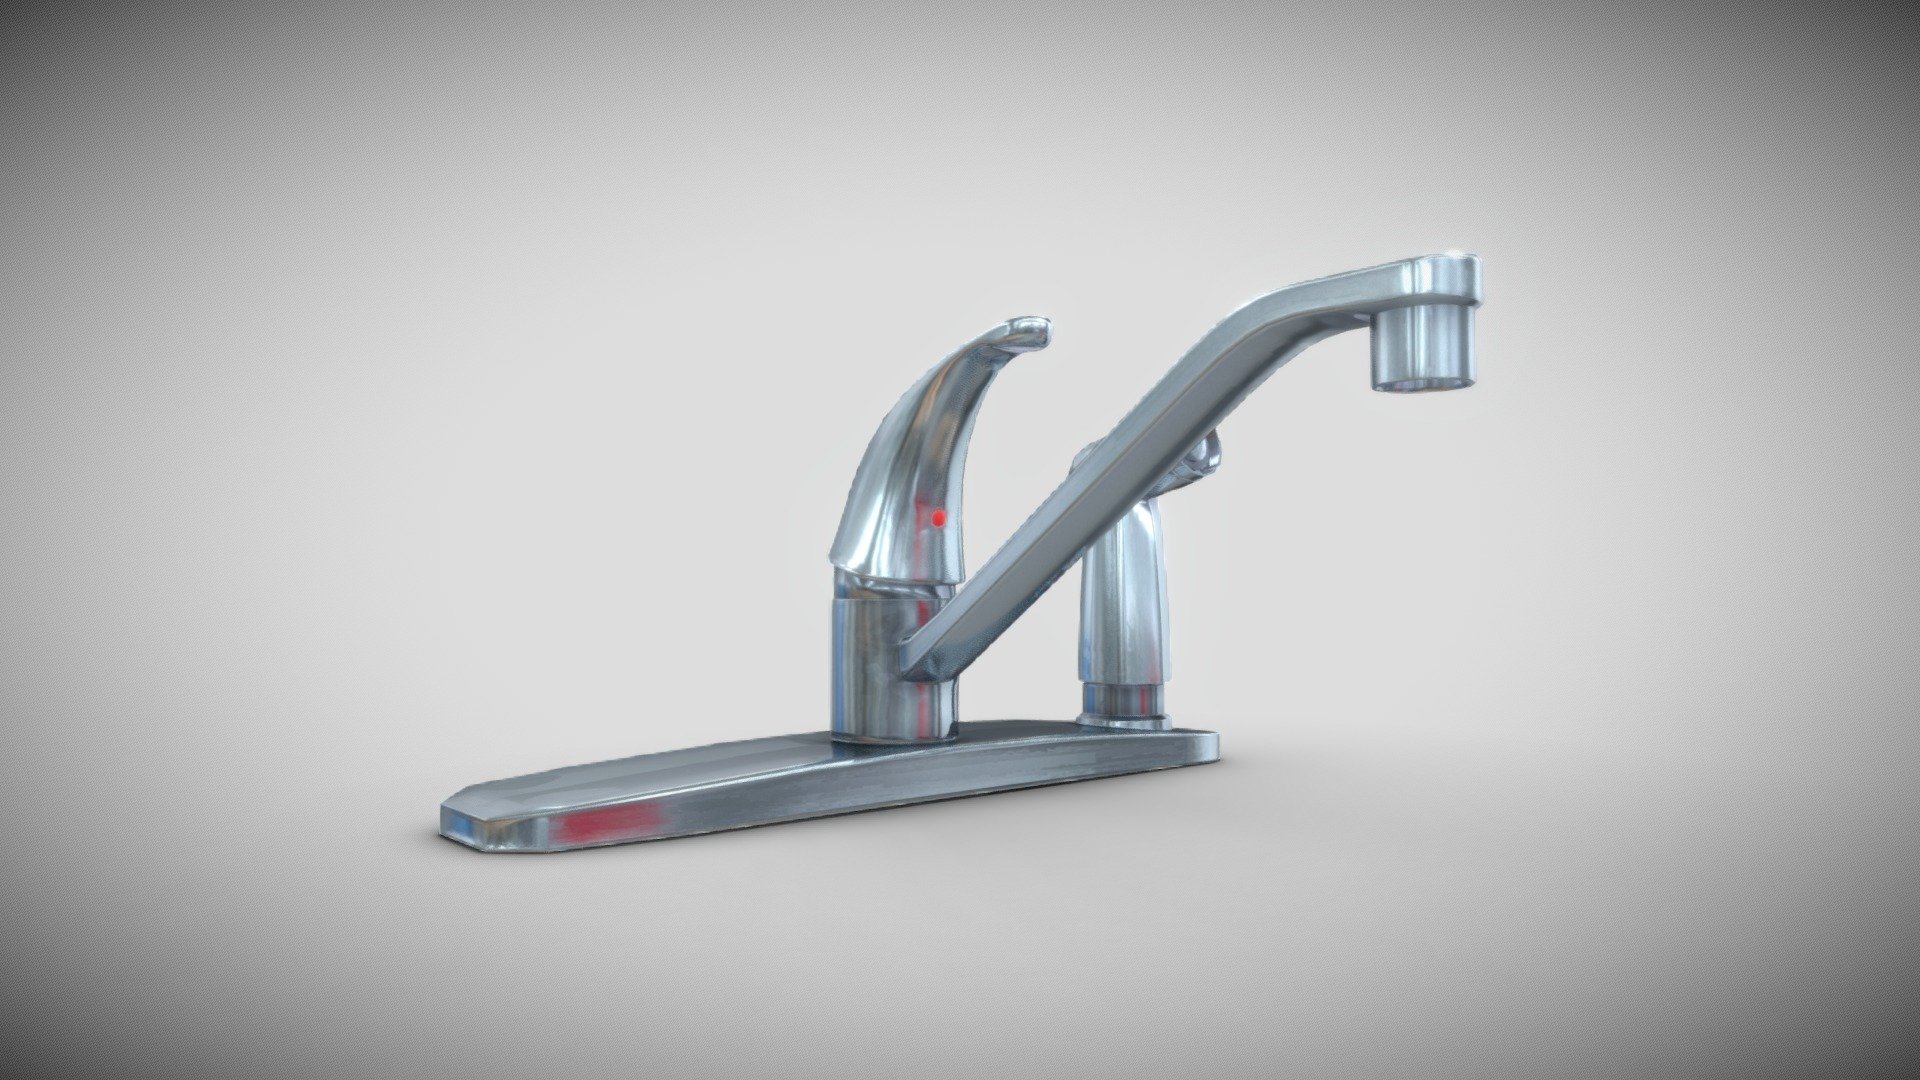 Water Tap Design
Made in Maya and Substance Painter
Stylized Design for decor, can be used in game engines and scene environment.
Available in both fbx and obj format 3d model